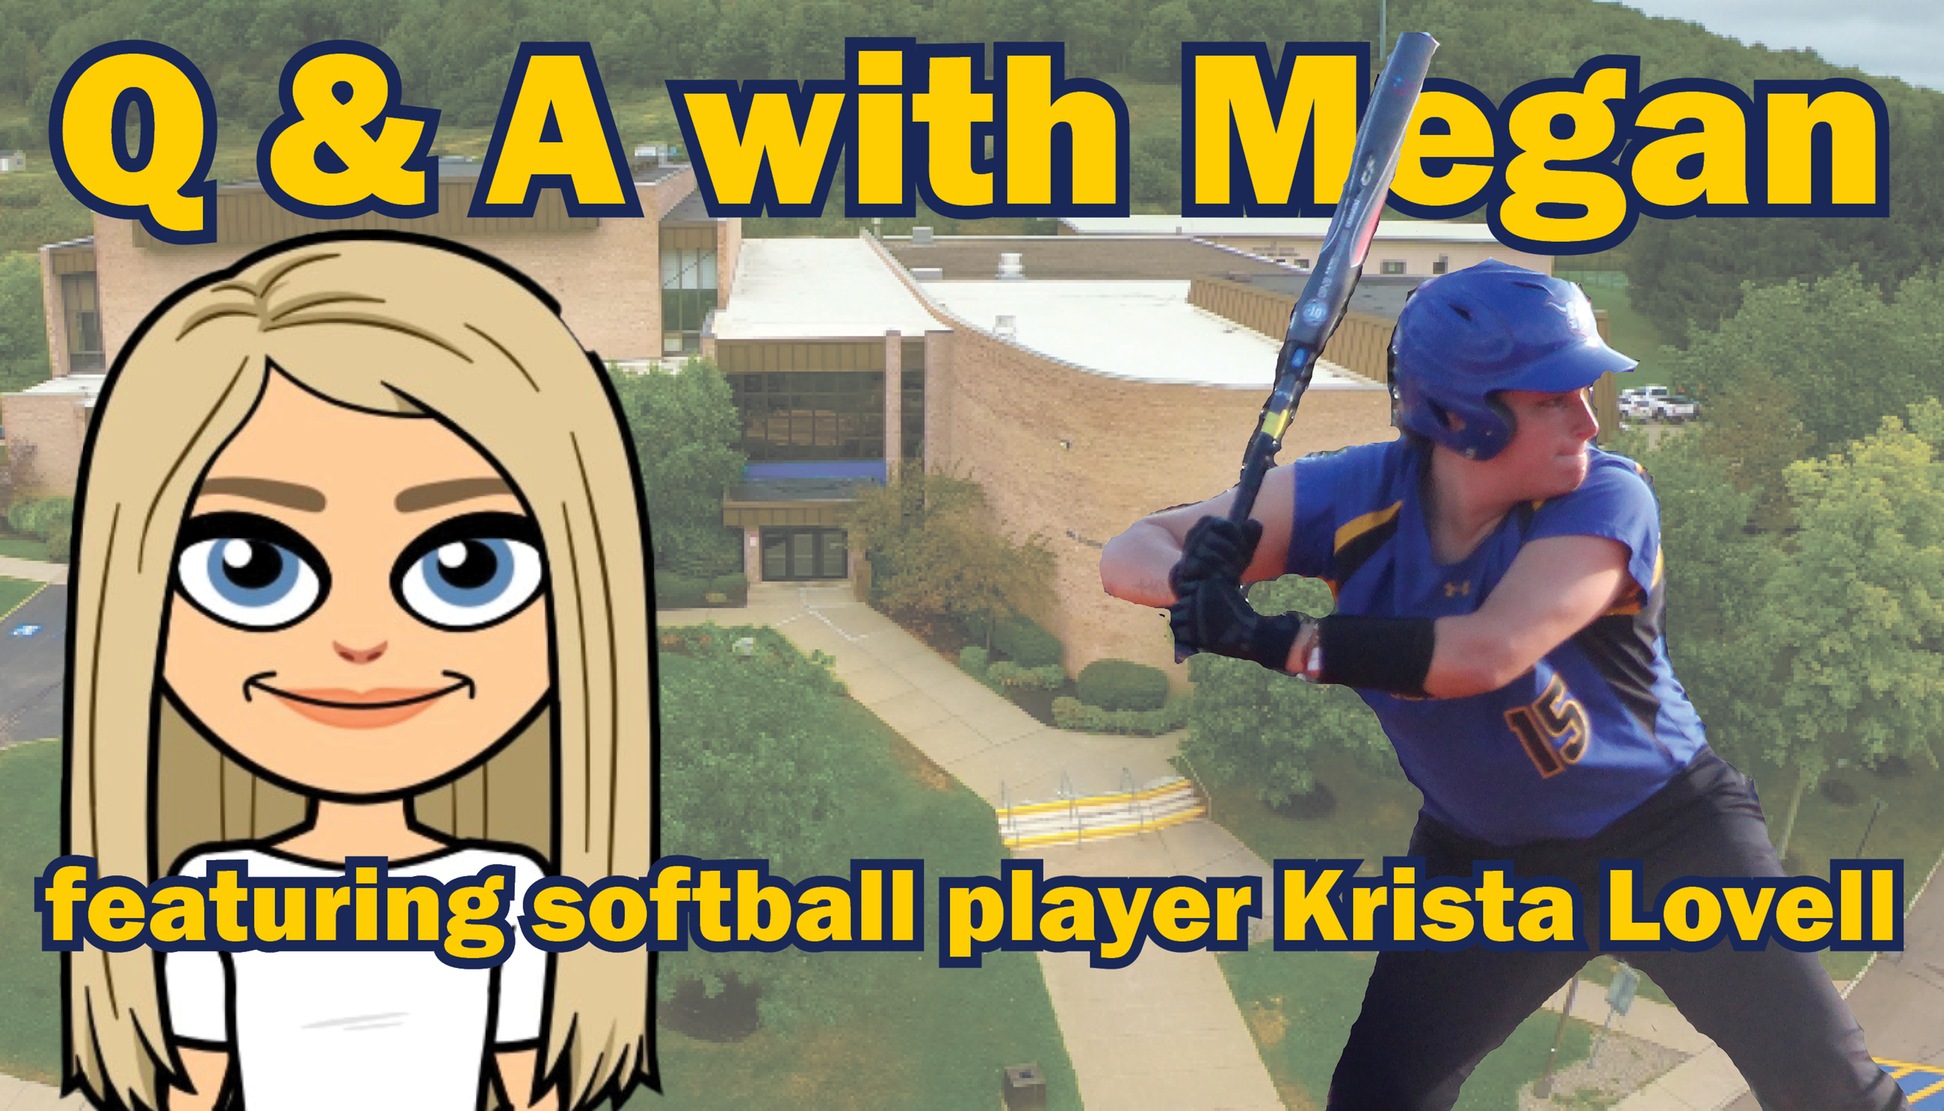 Q&A with Megan featuring softball player Krista Lovell - Lovell is pictured at the plate.